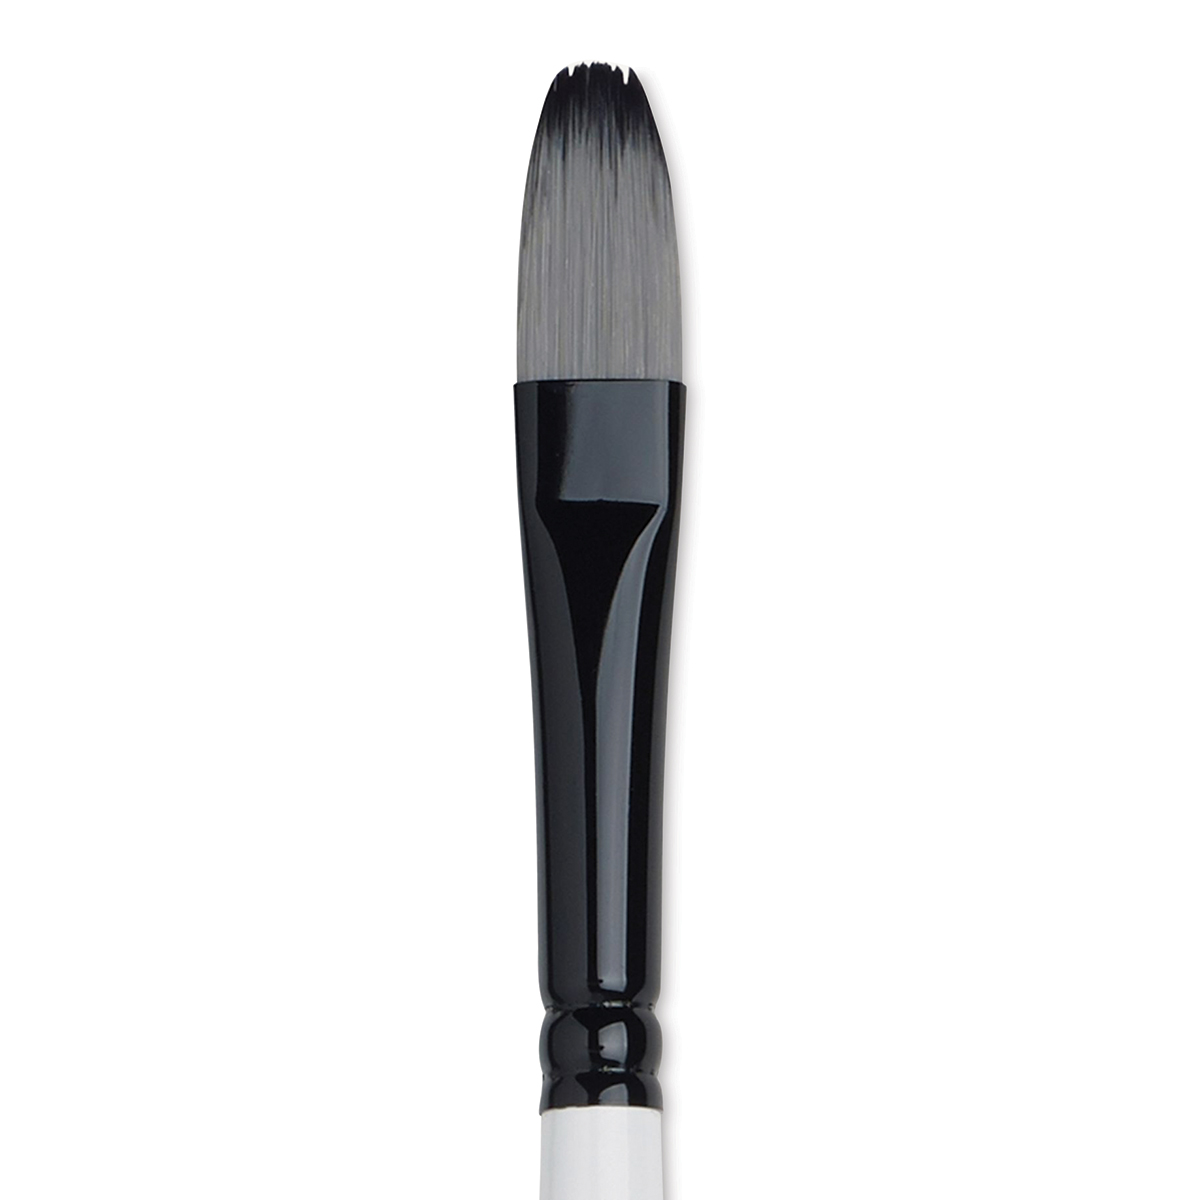 brand new winsor & Newton brushes split instantly : r/minipainting